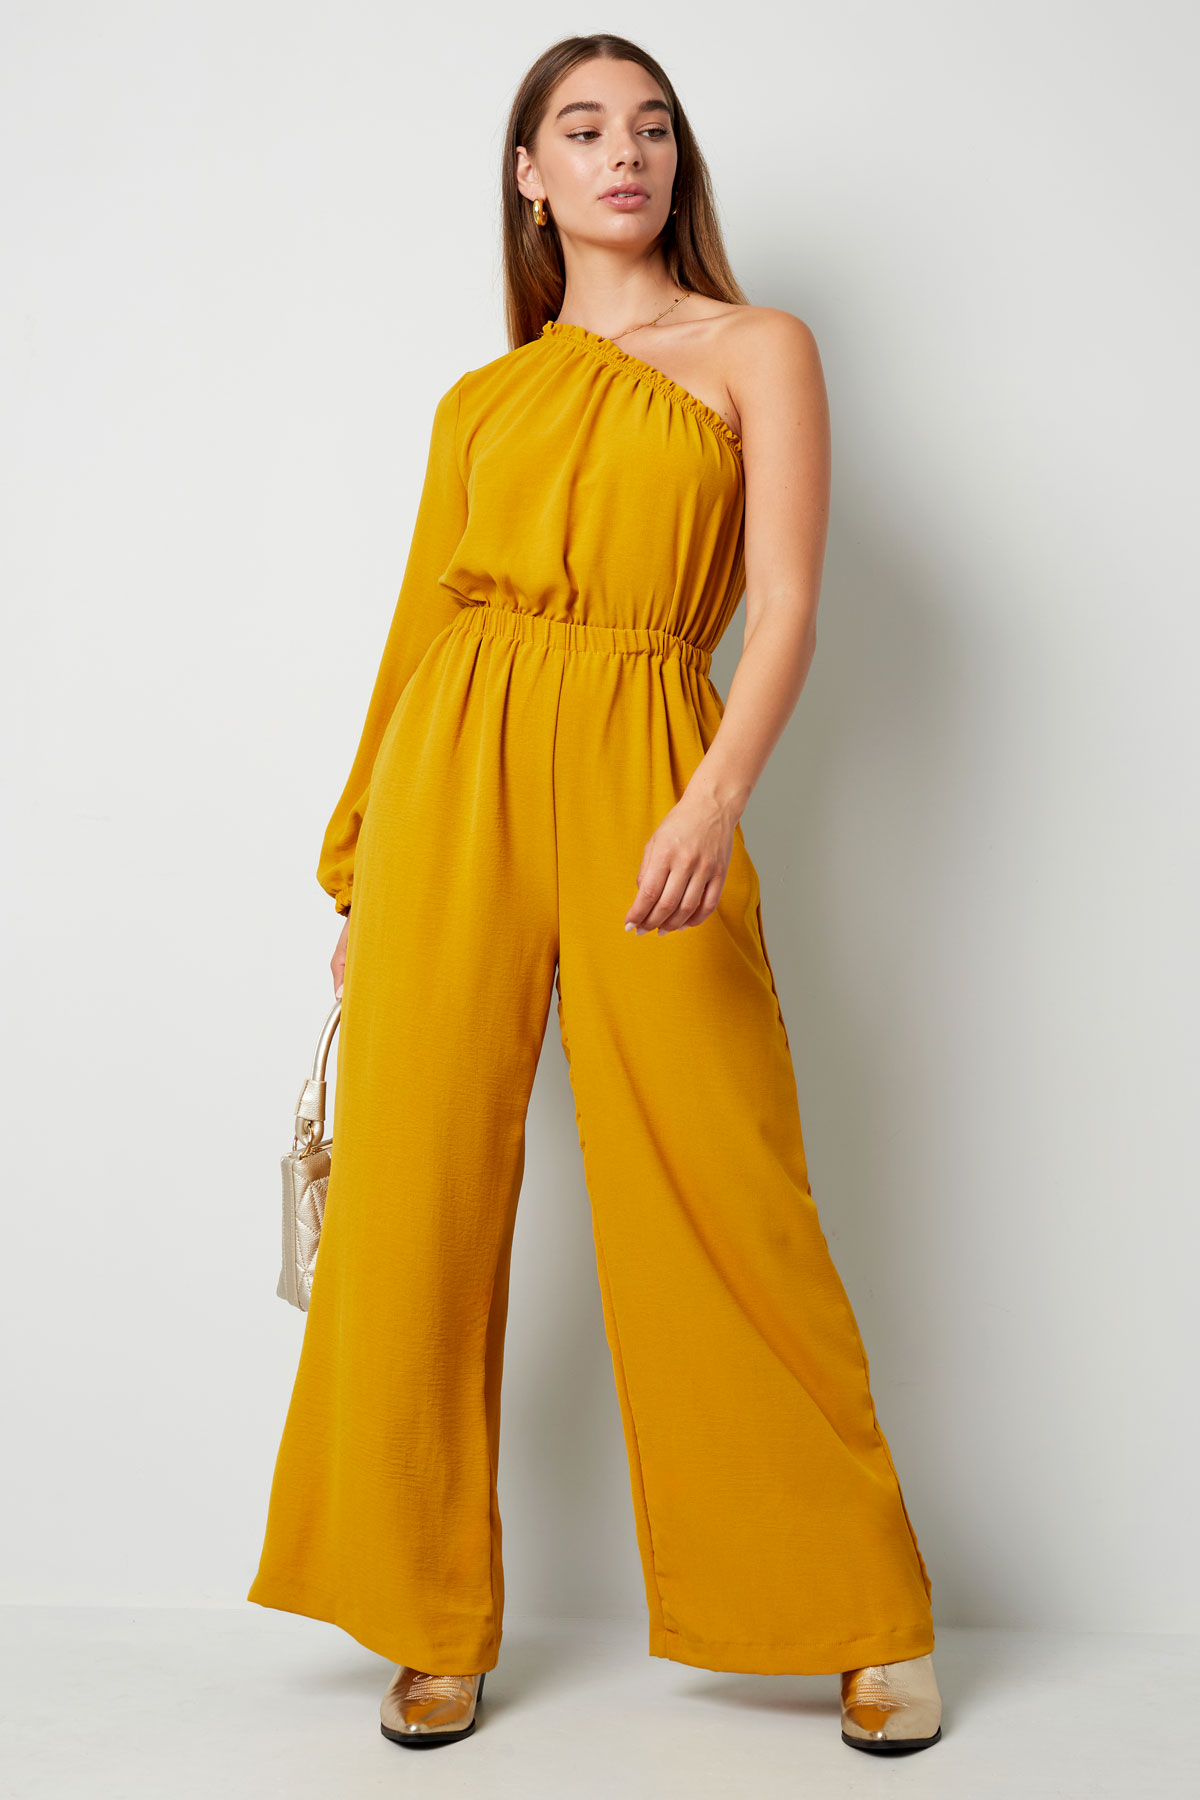 Jumpsuit one-shoulder - mustard yellow Picture7